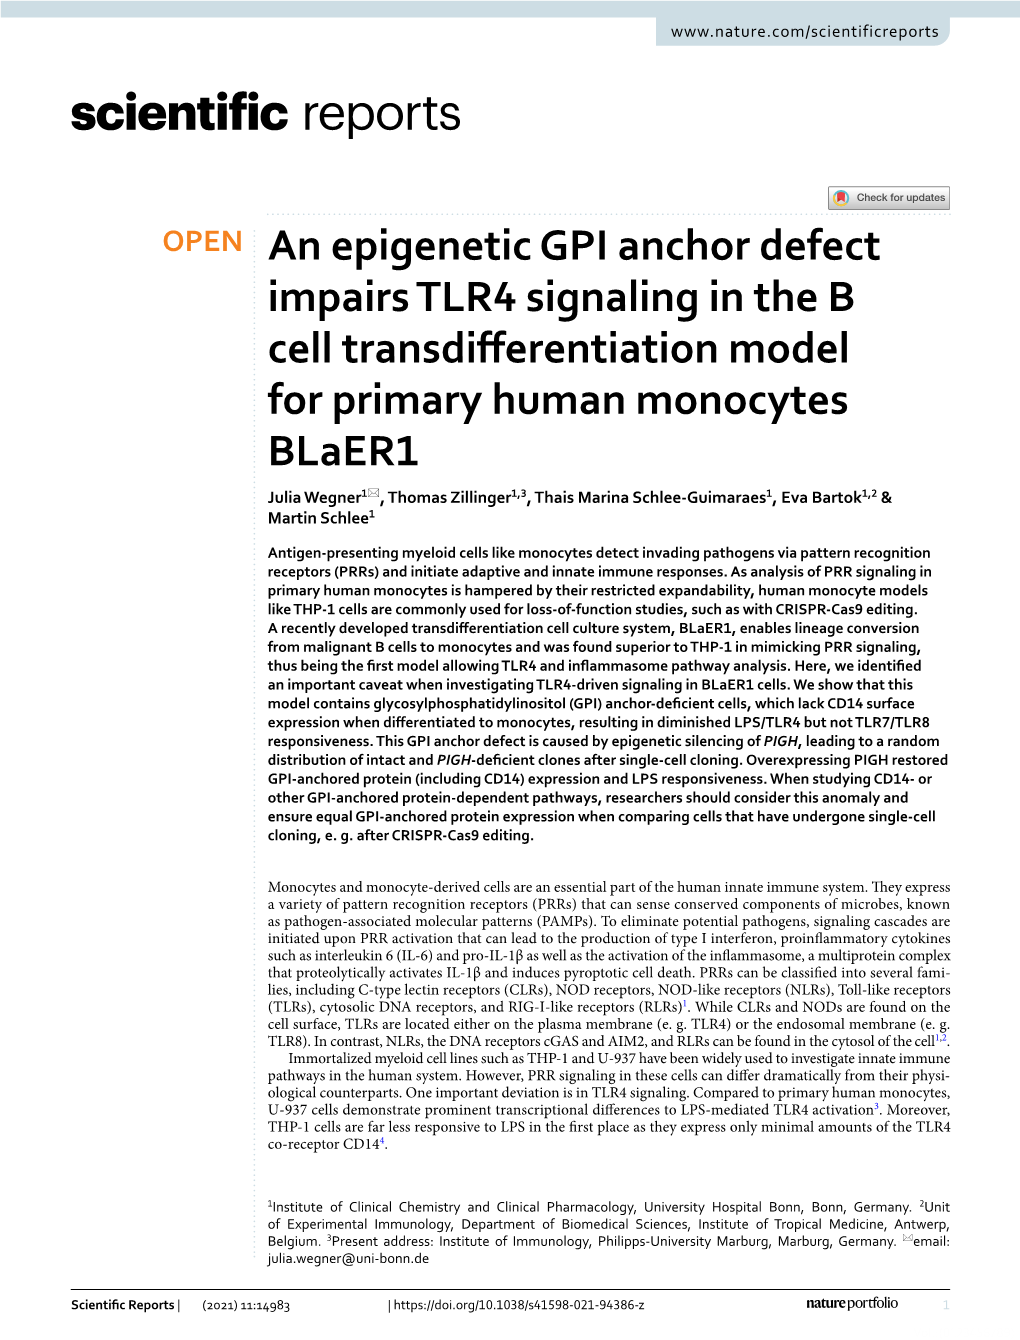 An Epigenetic GPI Anchor Defect Impairs TLR4 Signaling in the B Cell